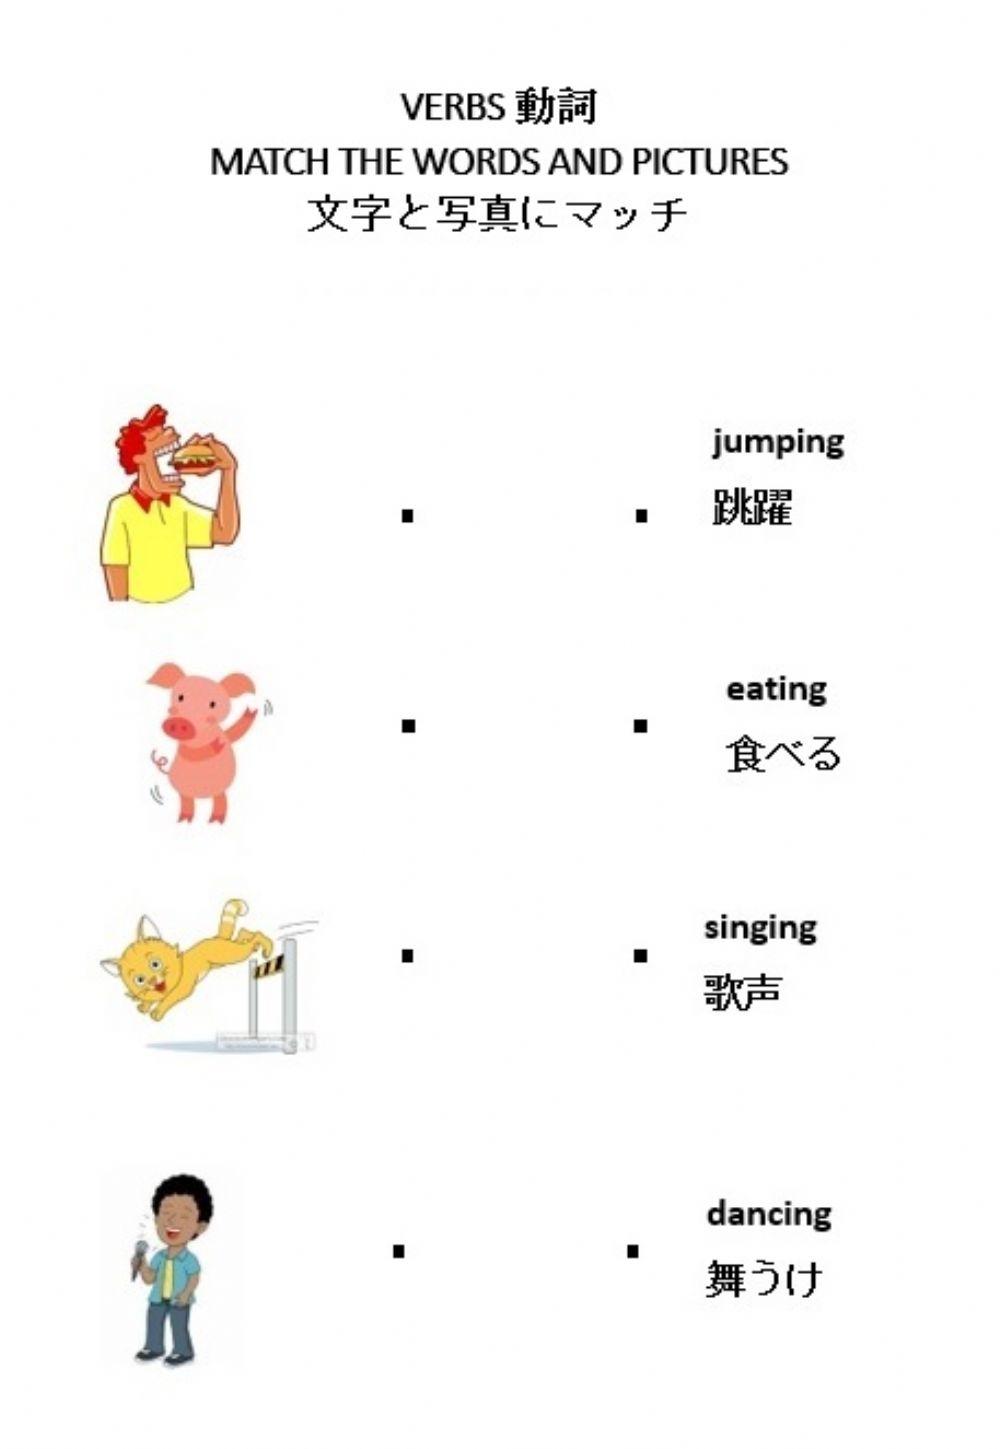 Matching verbs and pictures